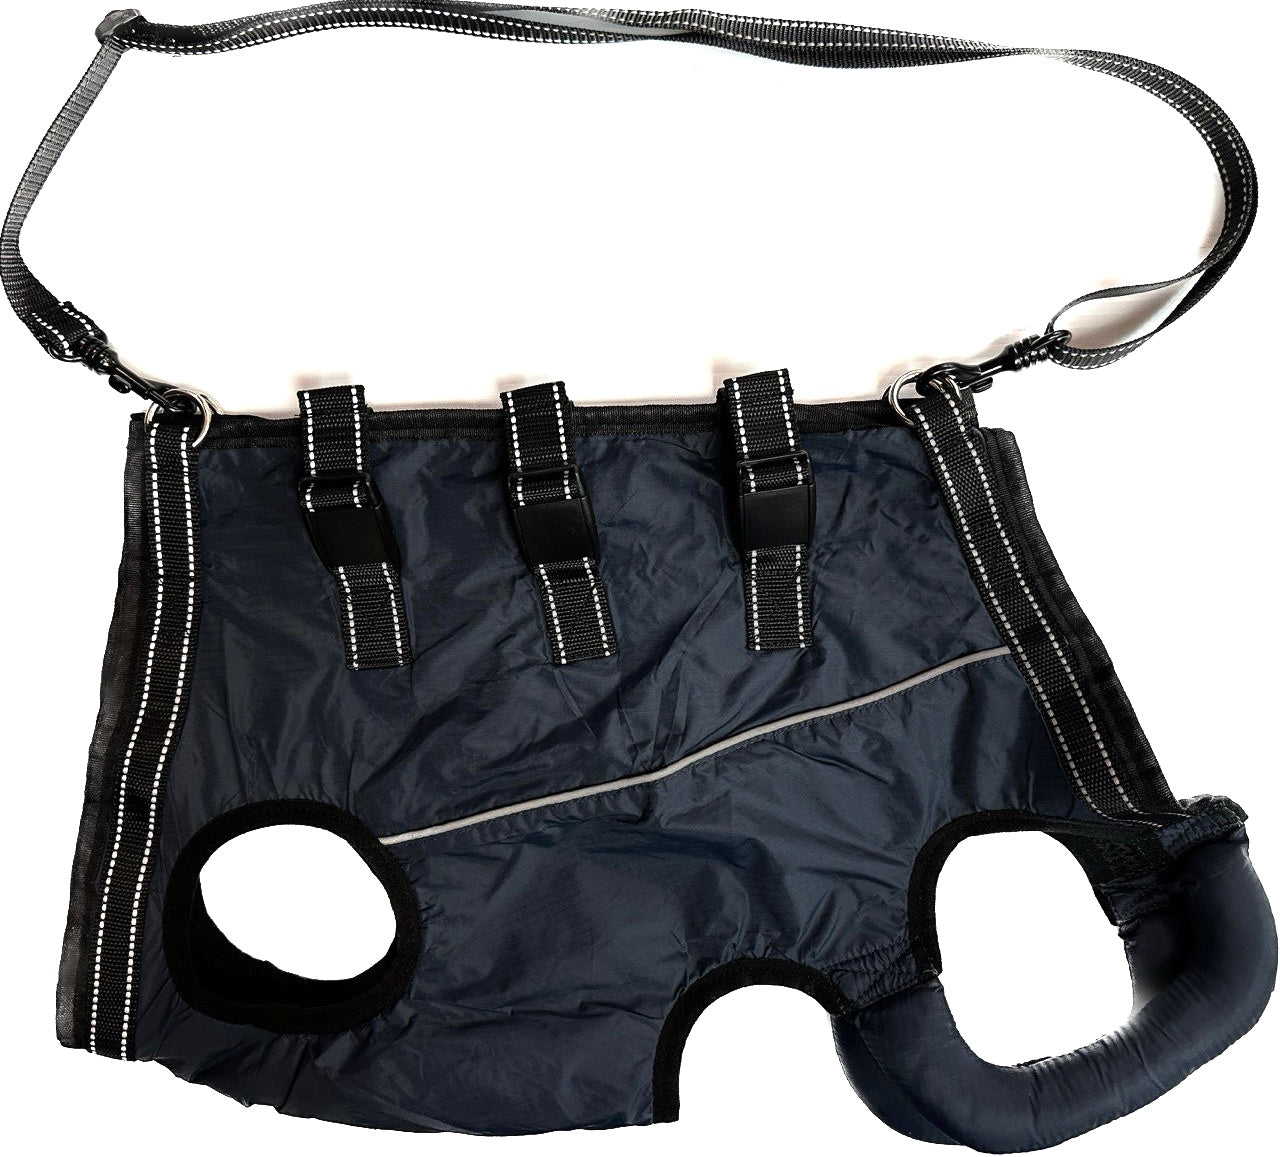 Dog Walking Support Harness